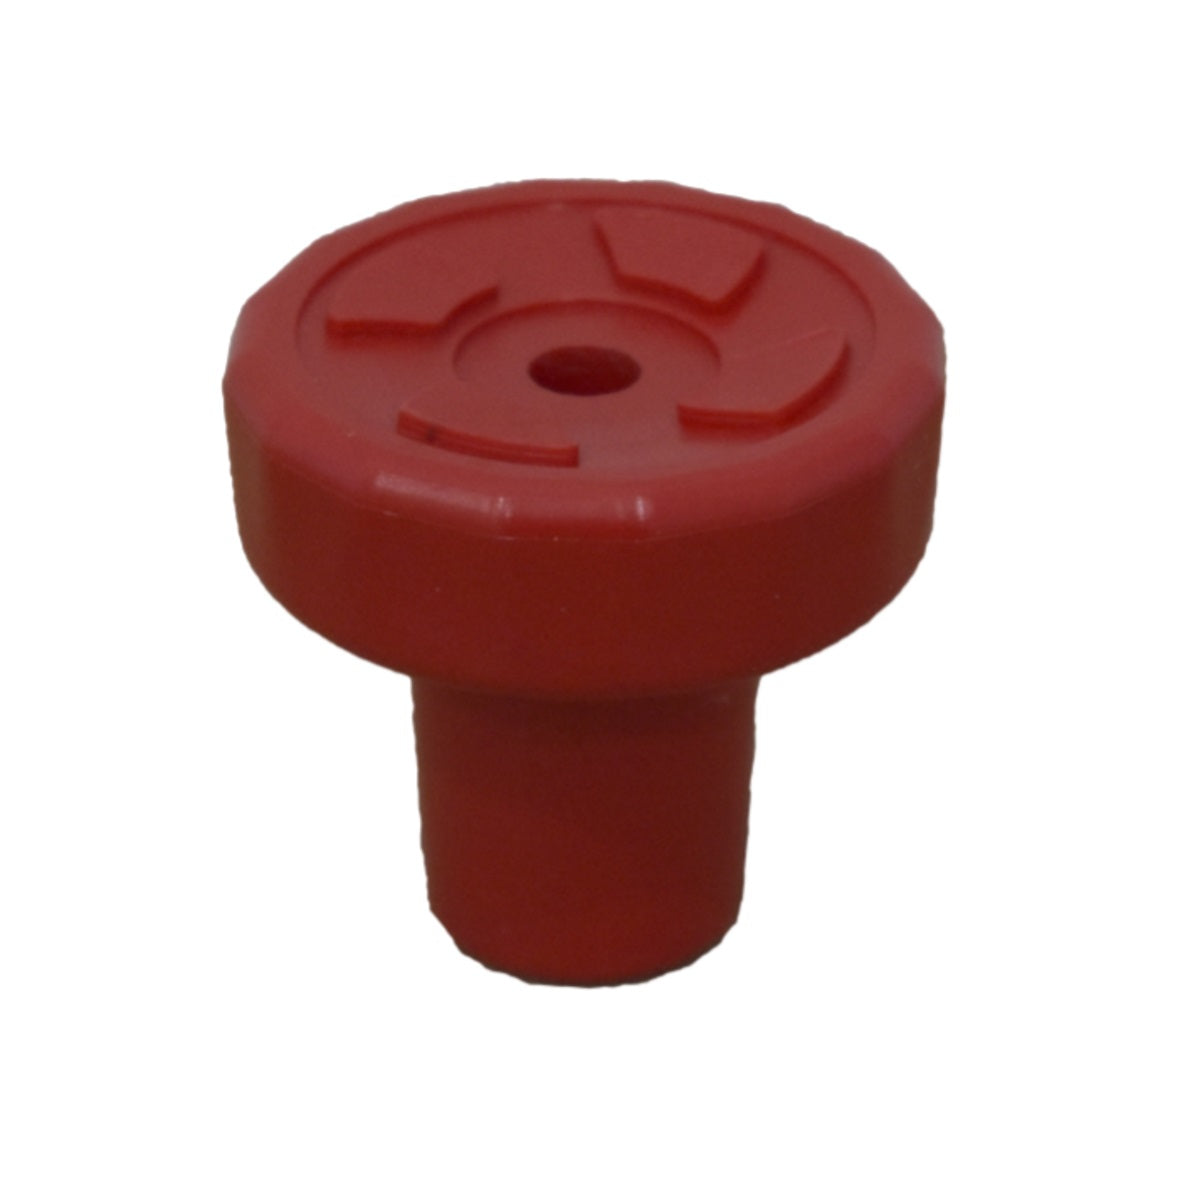 Diamond Lead Reels Replacement Red Knob for sale (REKU-RED)